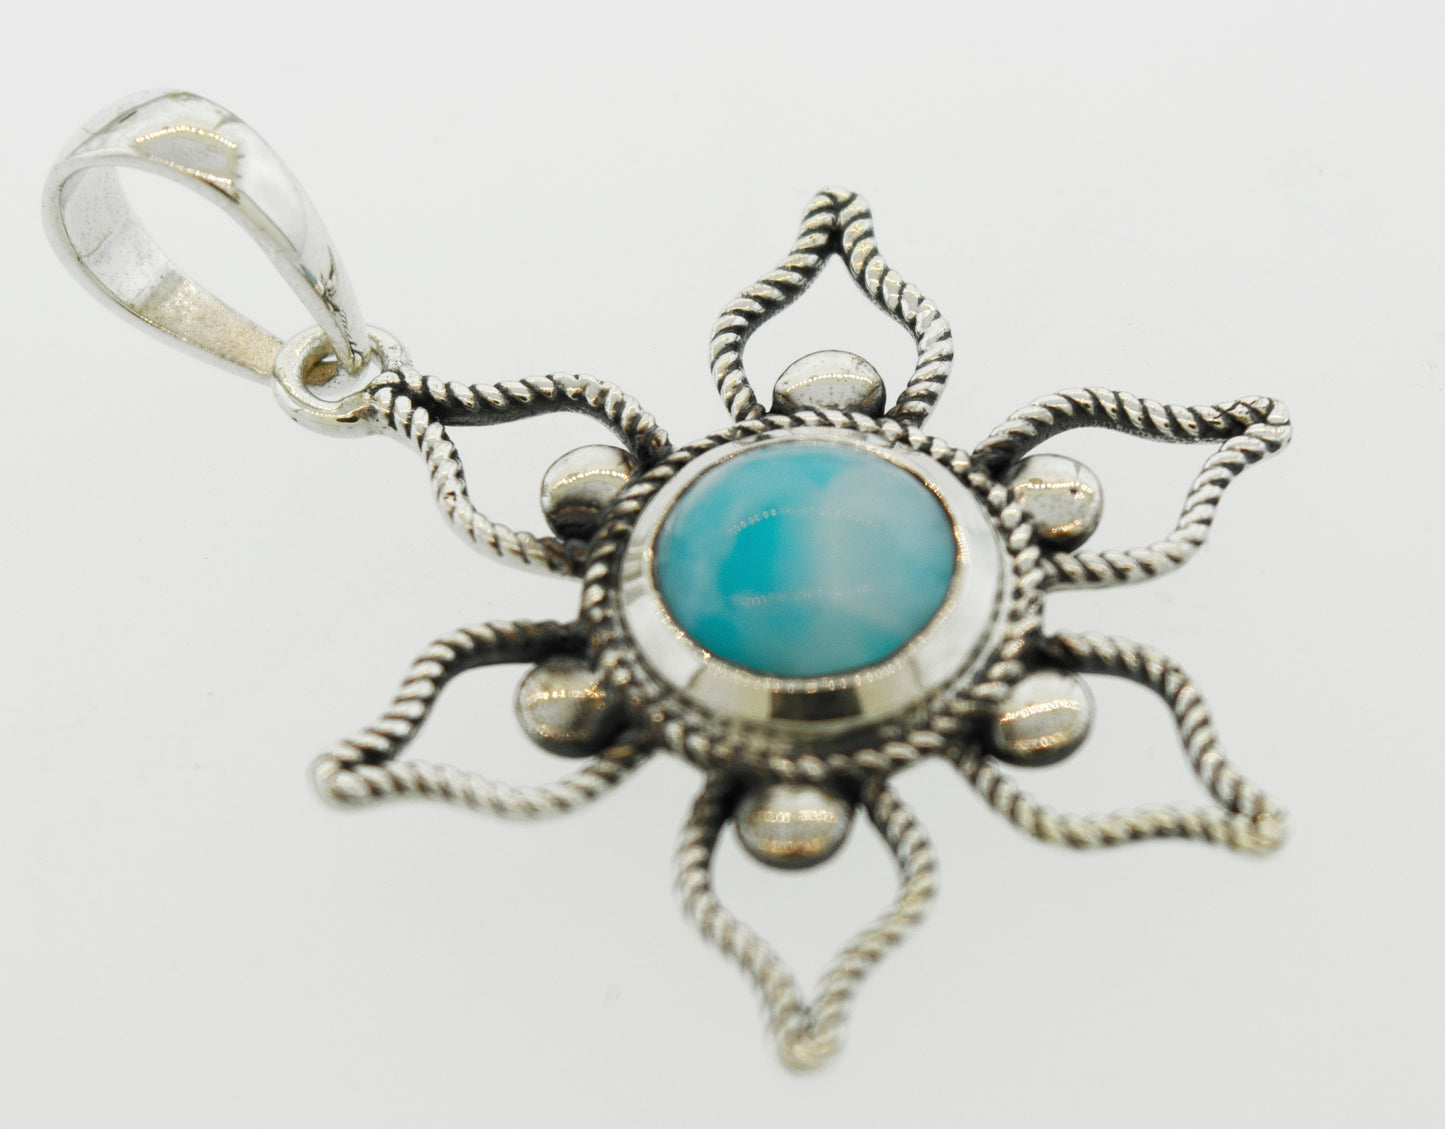 A Larimar Flower Pendant from Super Silver with a turquoise stone is the perfect addition to your beach day outfit.